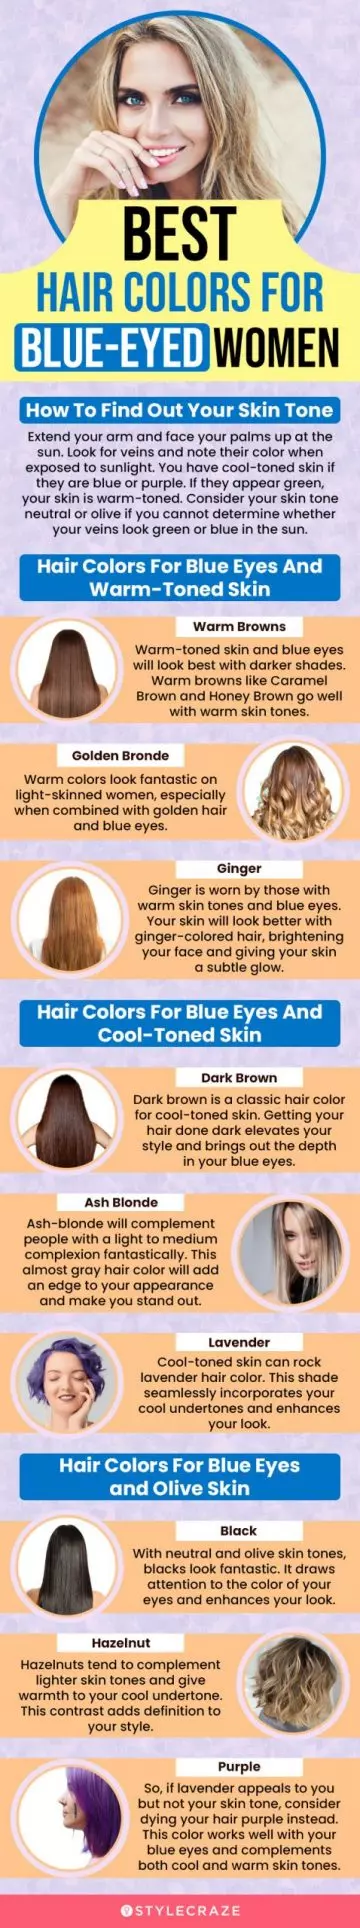 best hair colors for blue eyed women (infographic)